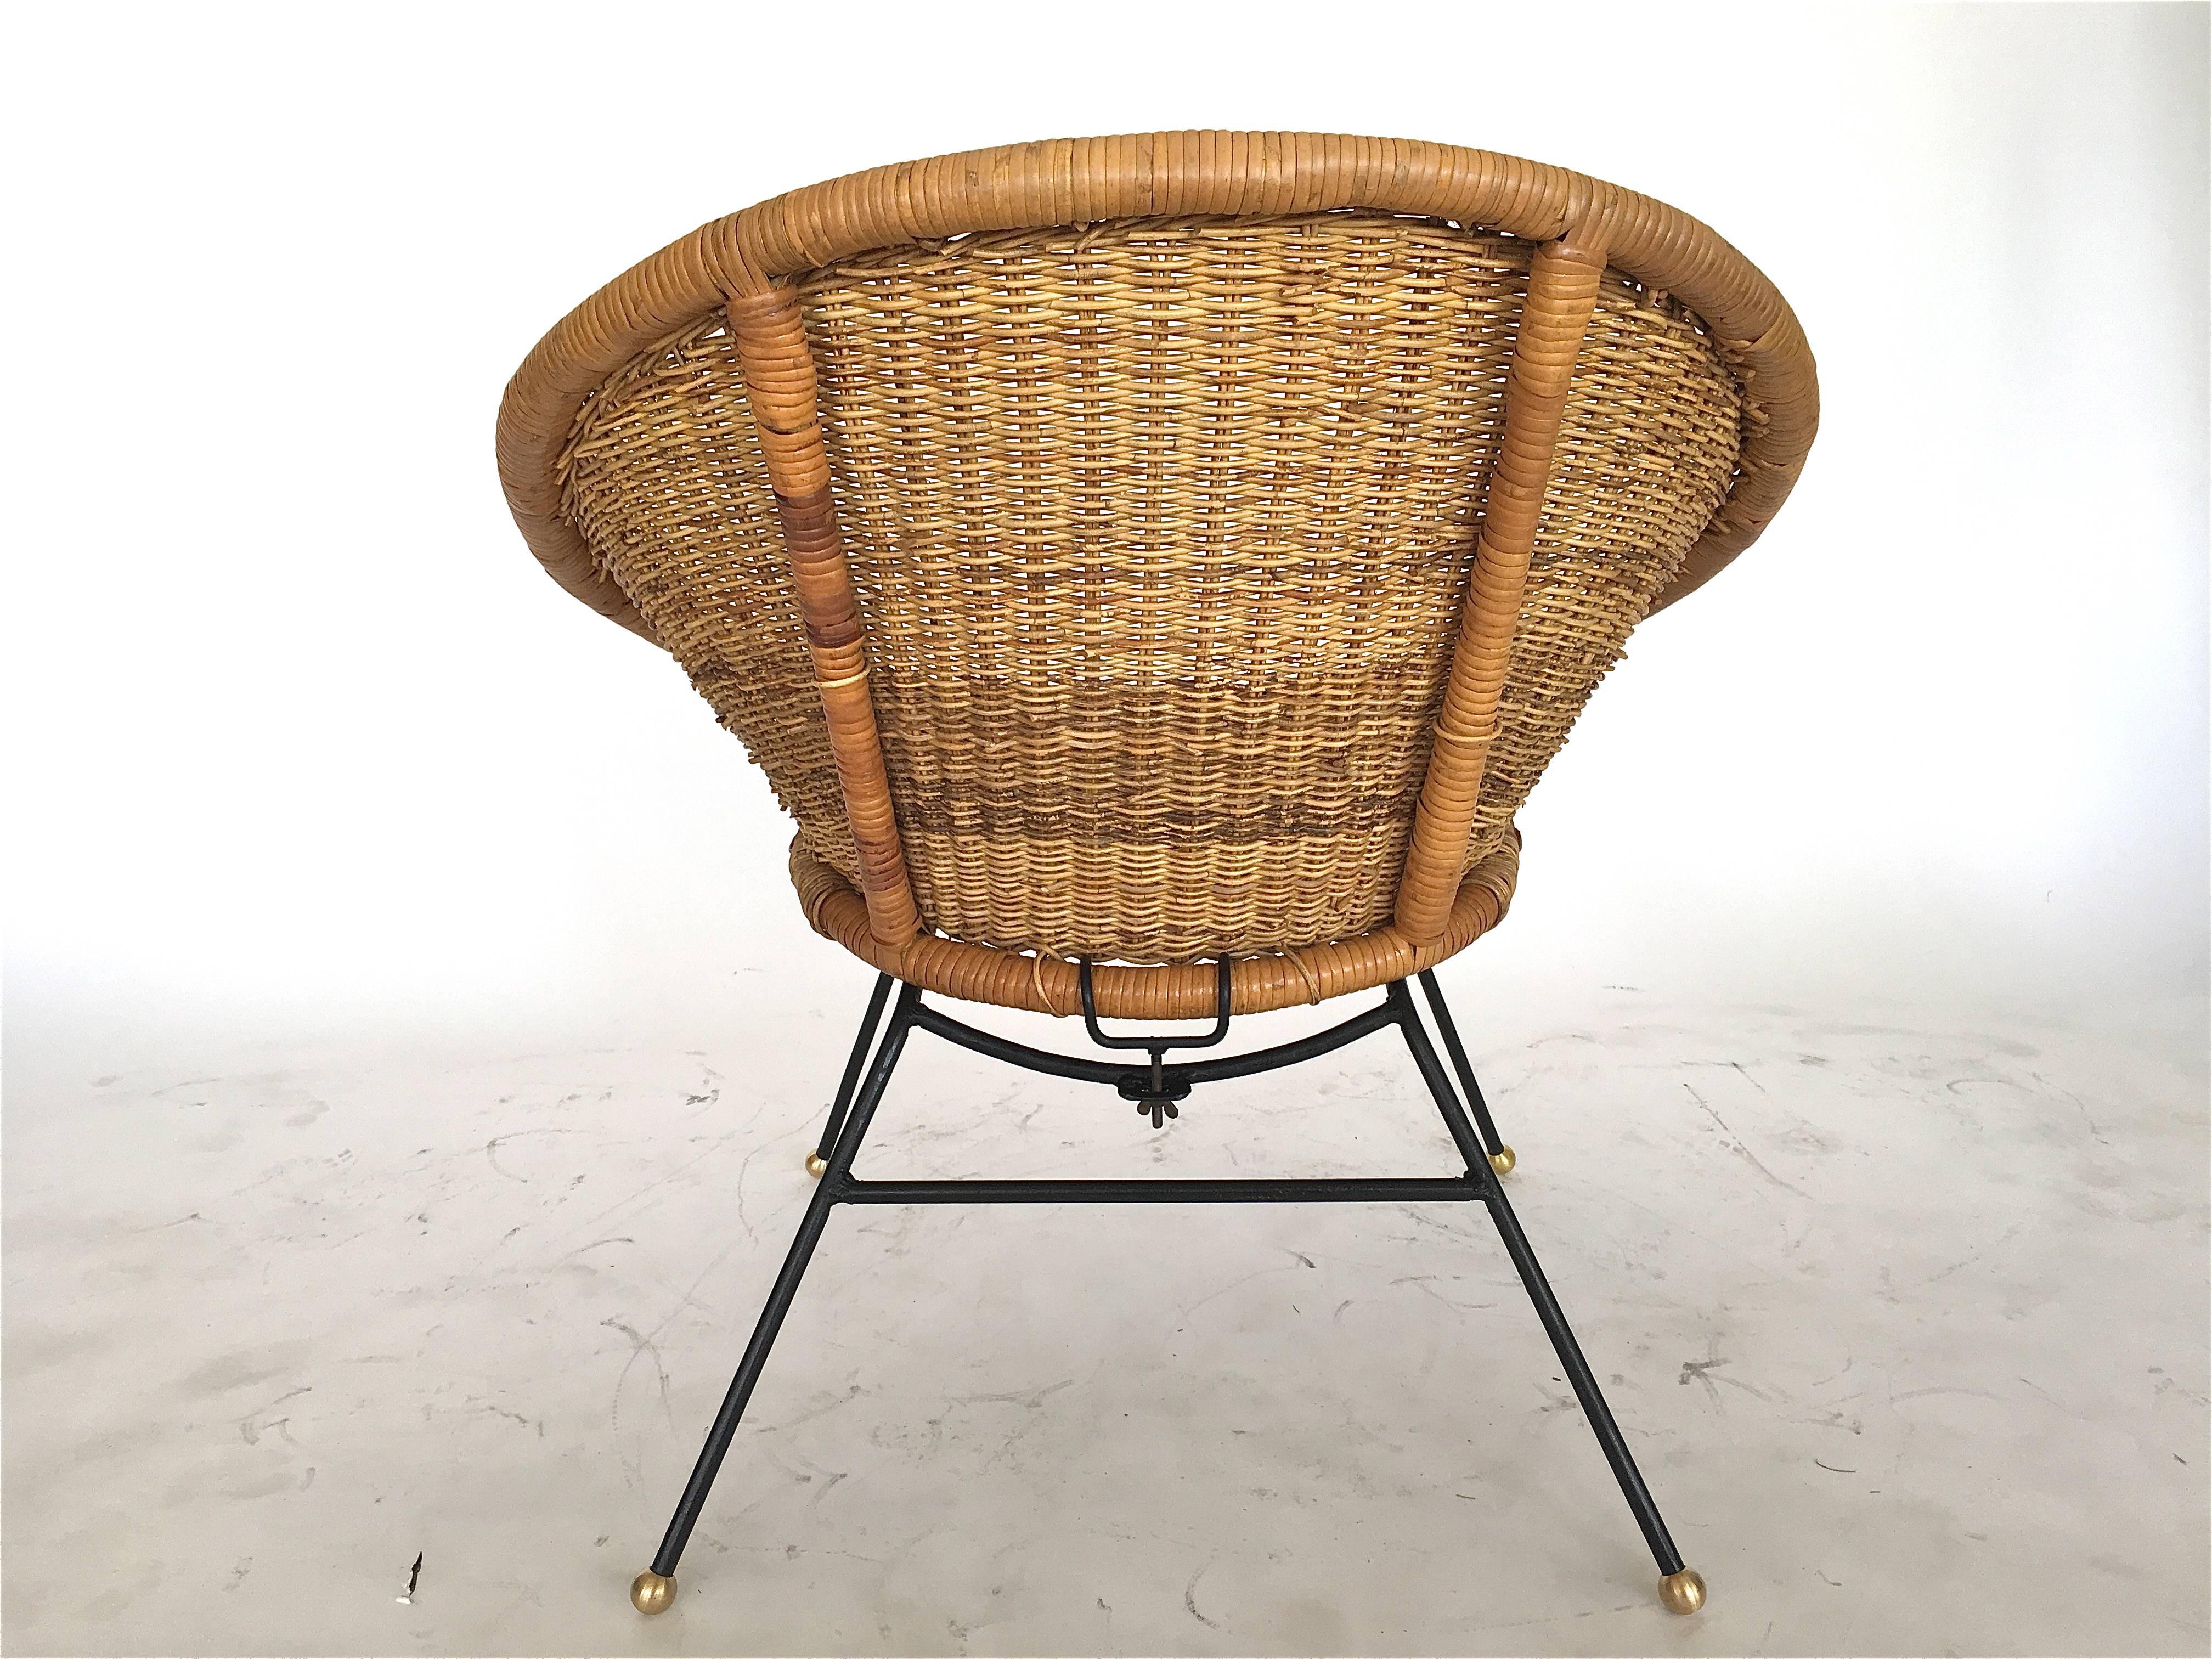 American Wicker and Iron Bucket Chair